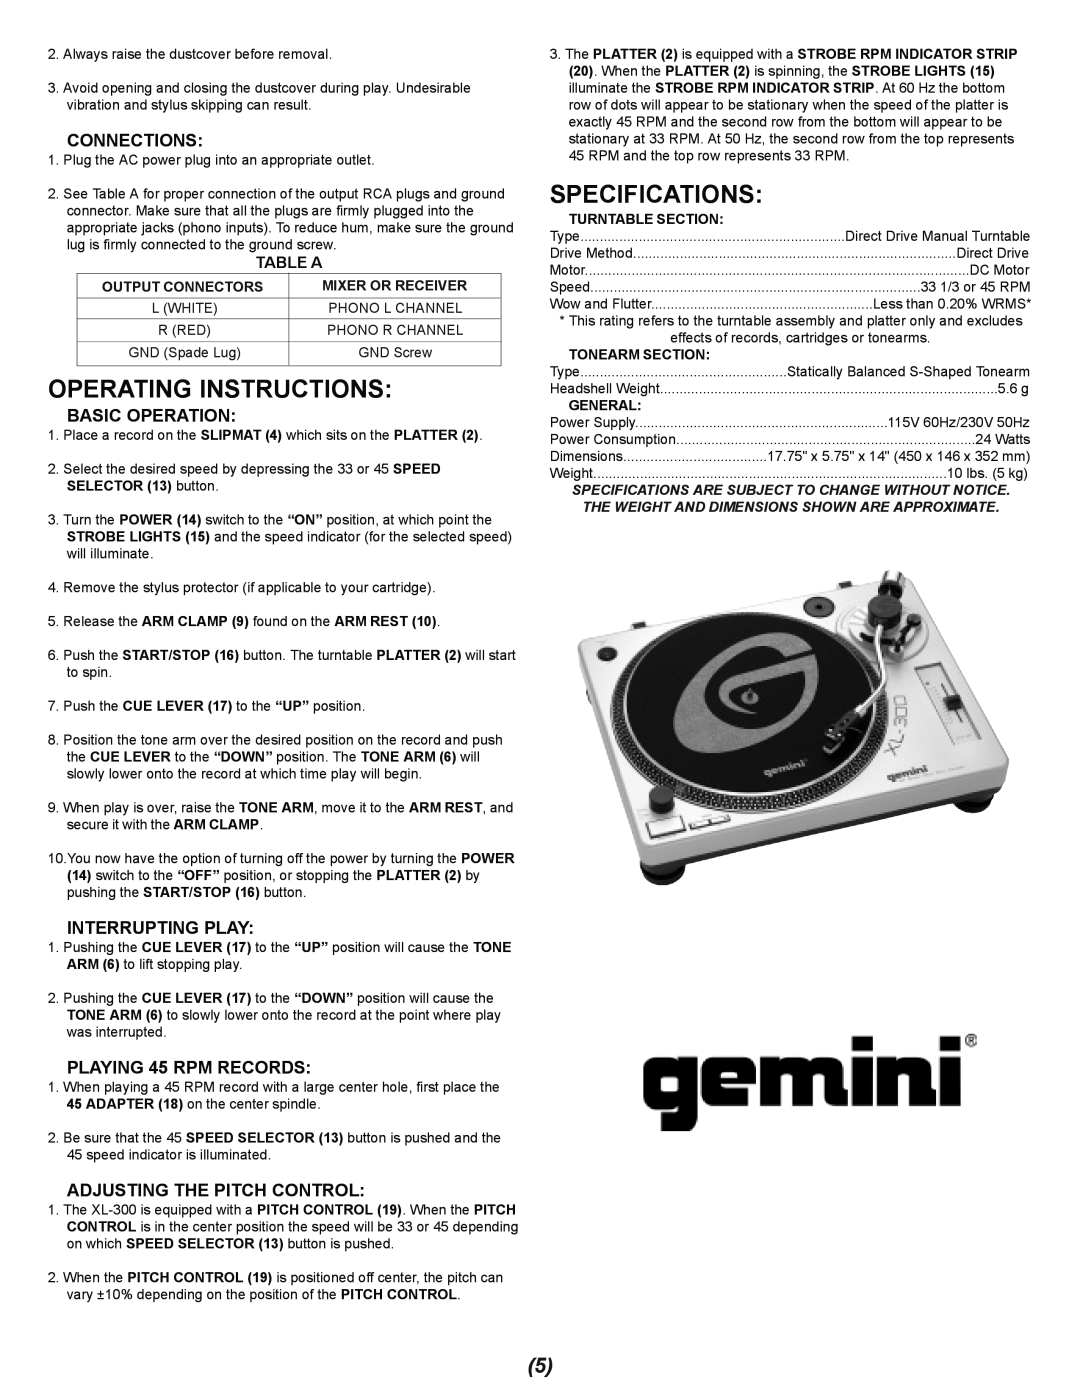 Gemini XL-300 manual Operating Instructions, Specifications, Connections, Basic Operation, Interrupting Play, Table A 